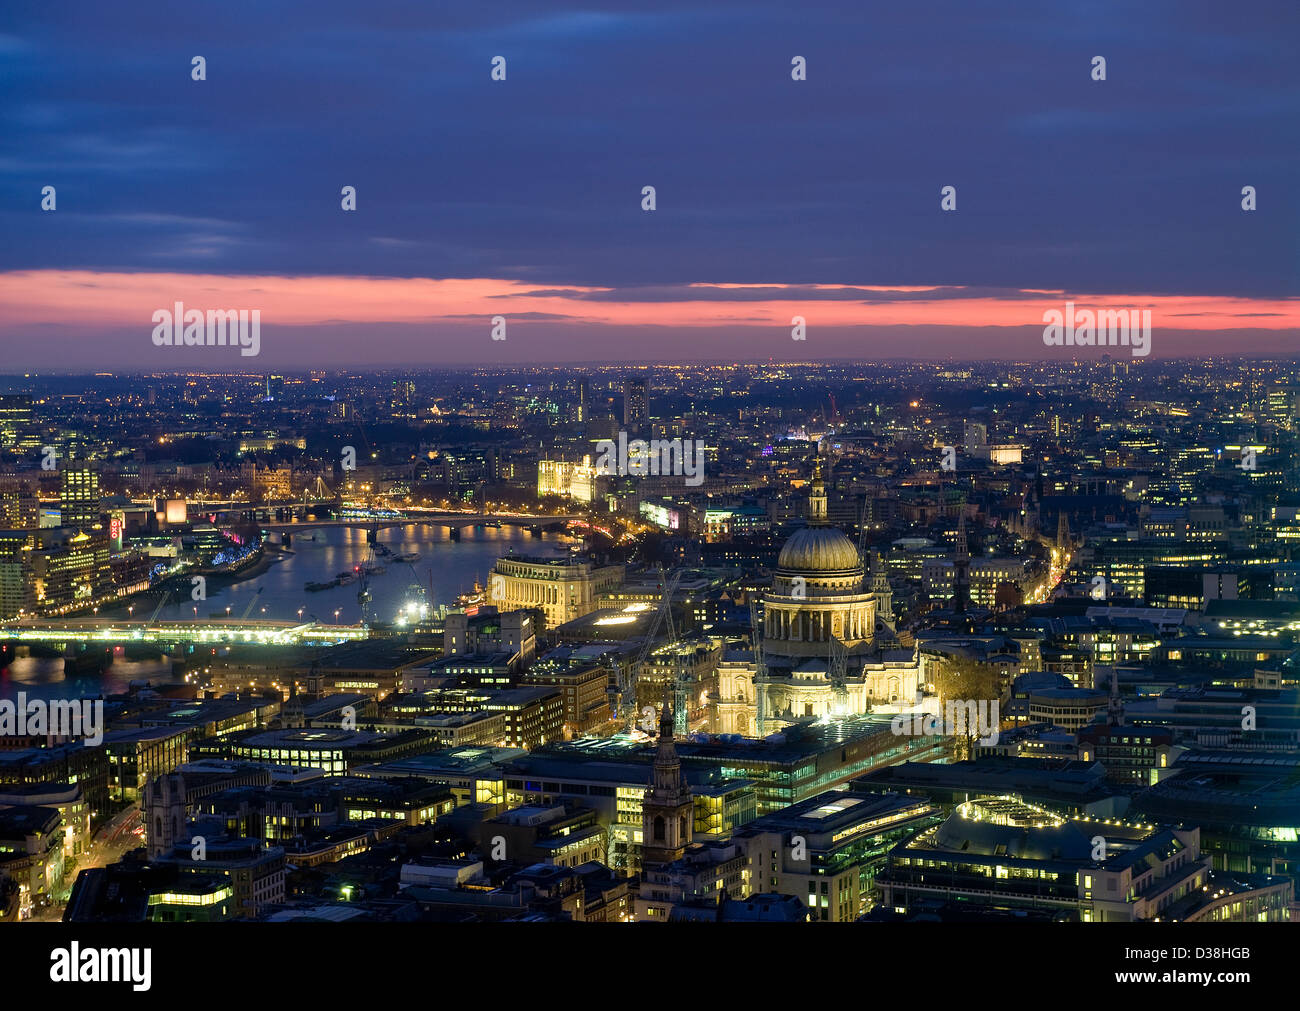 Aerial view of cityscape lit up at night Stock Photo